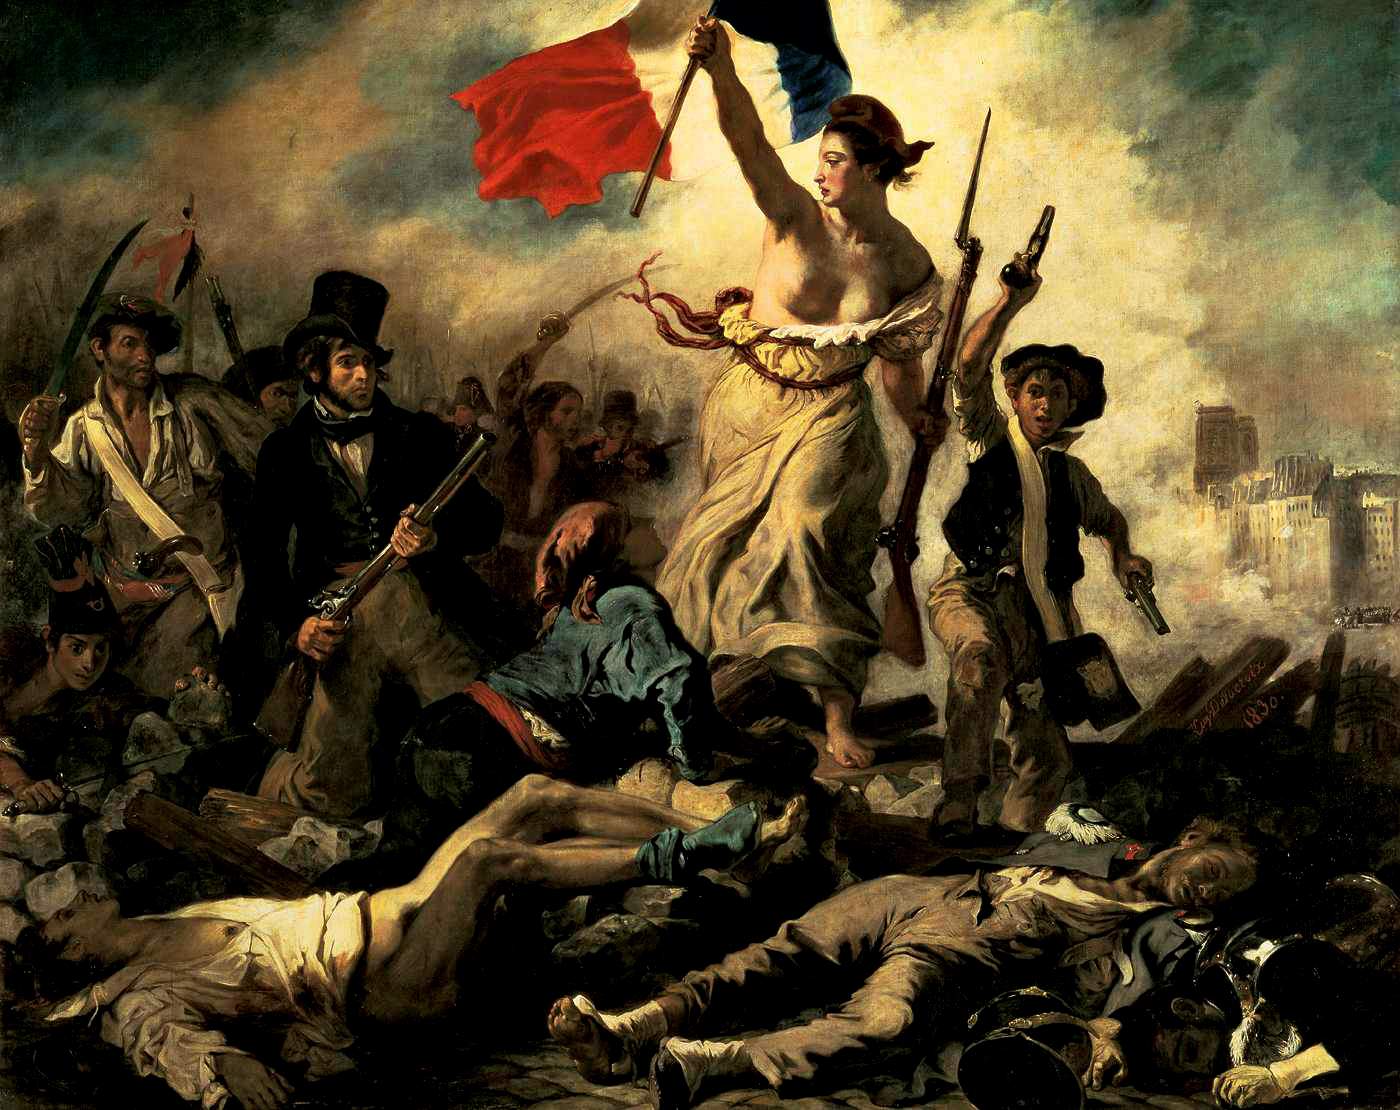 Liberty leading people by delacroix essay